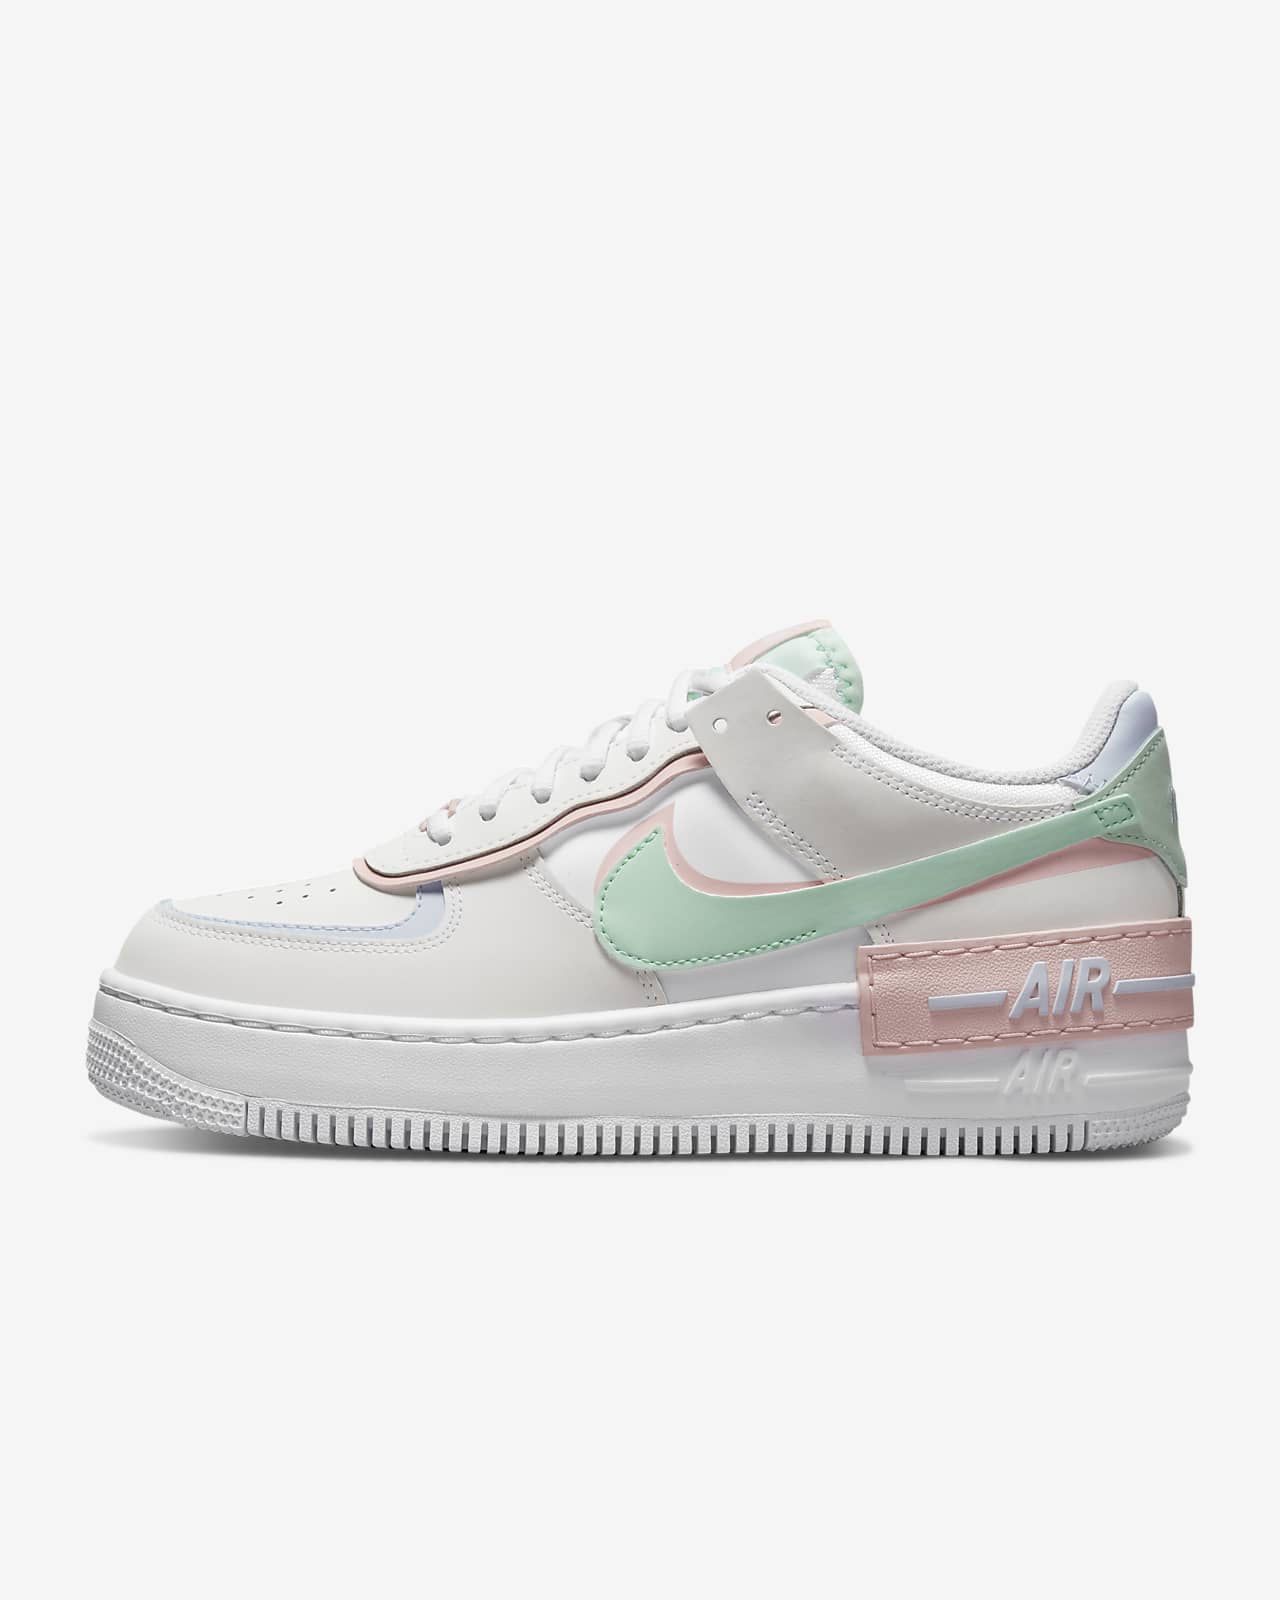 Chaussure Air Force 1 Shadow pour Femme. FR